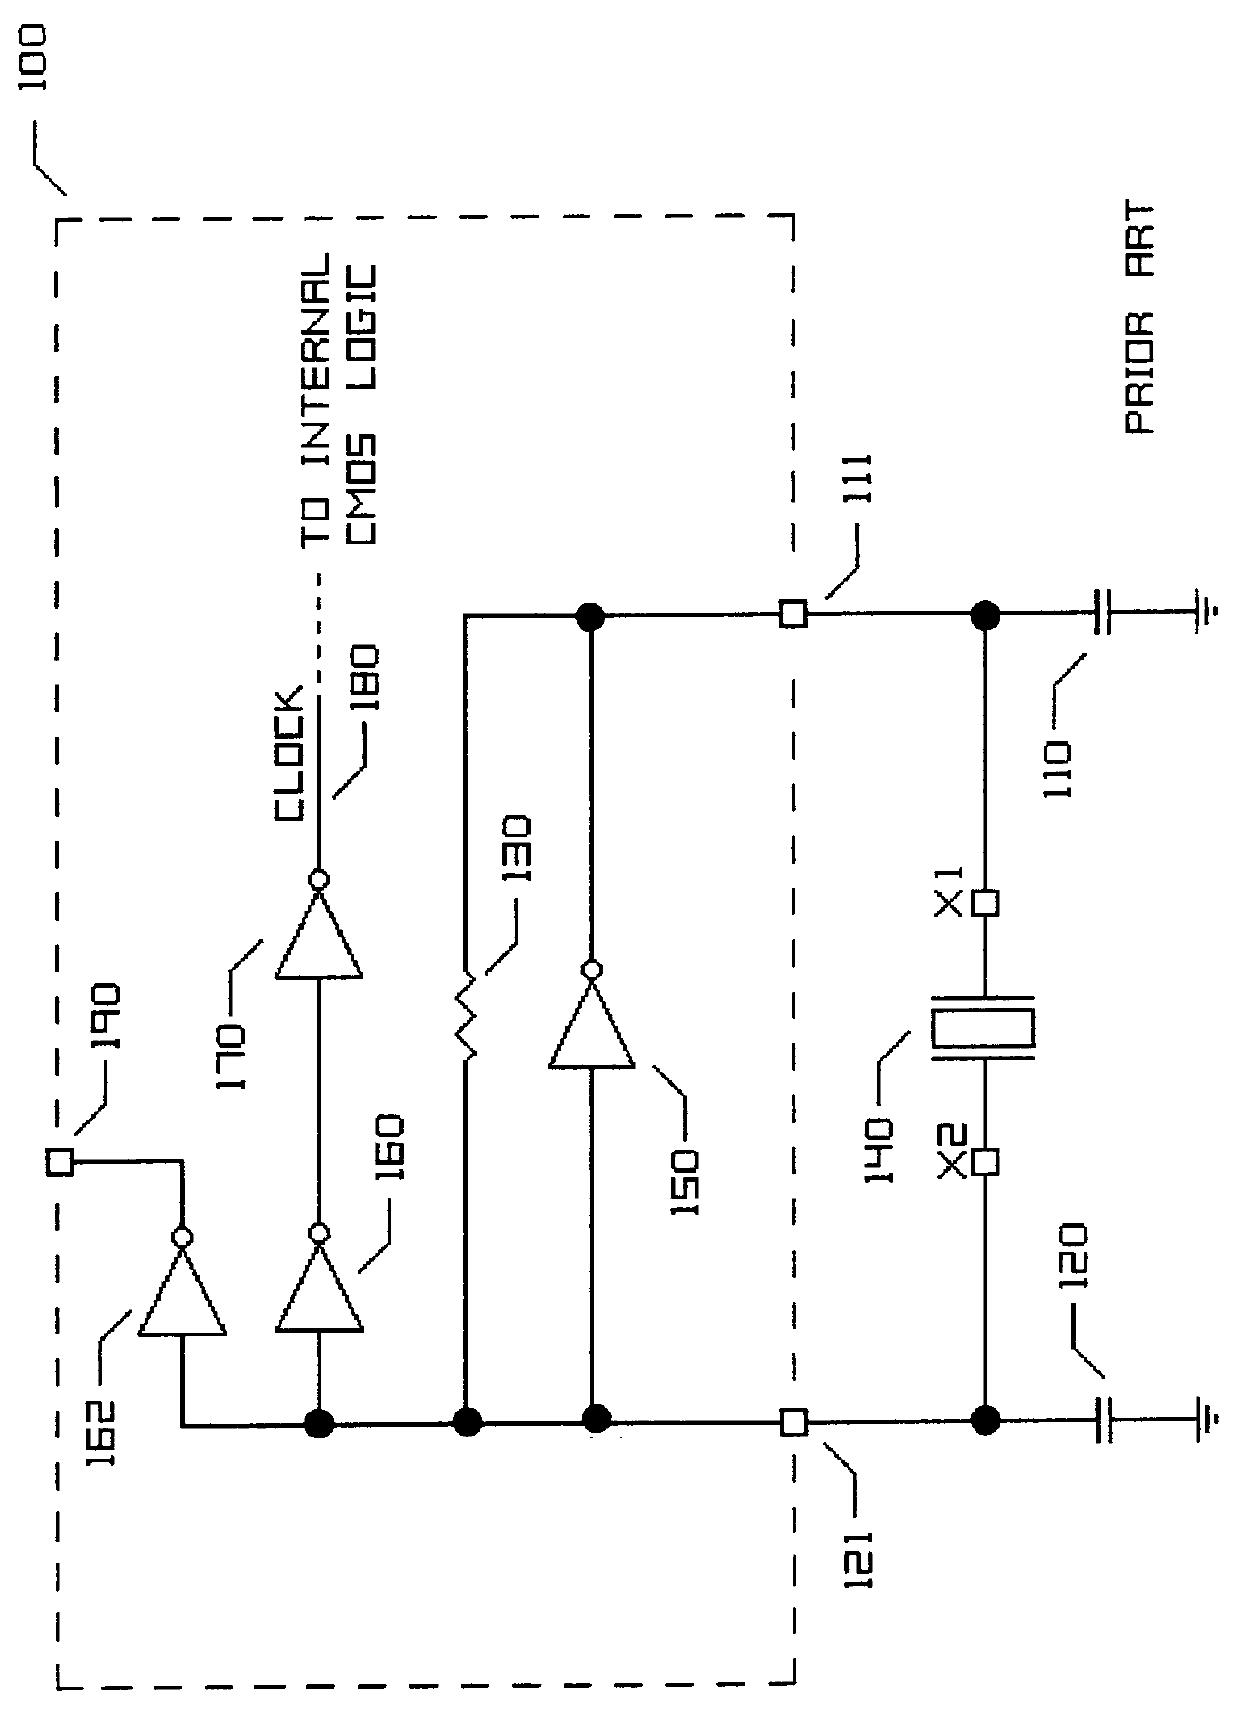 Tunable oscillator using a reference input frequency